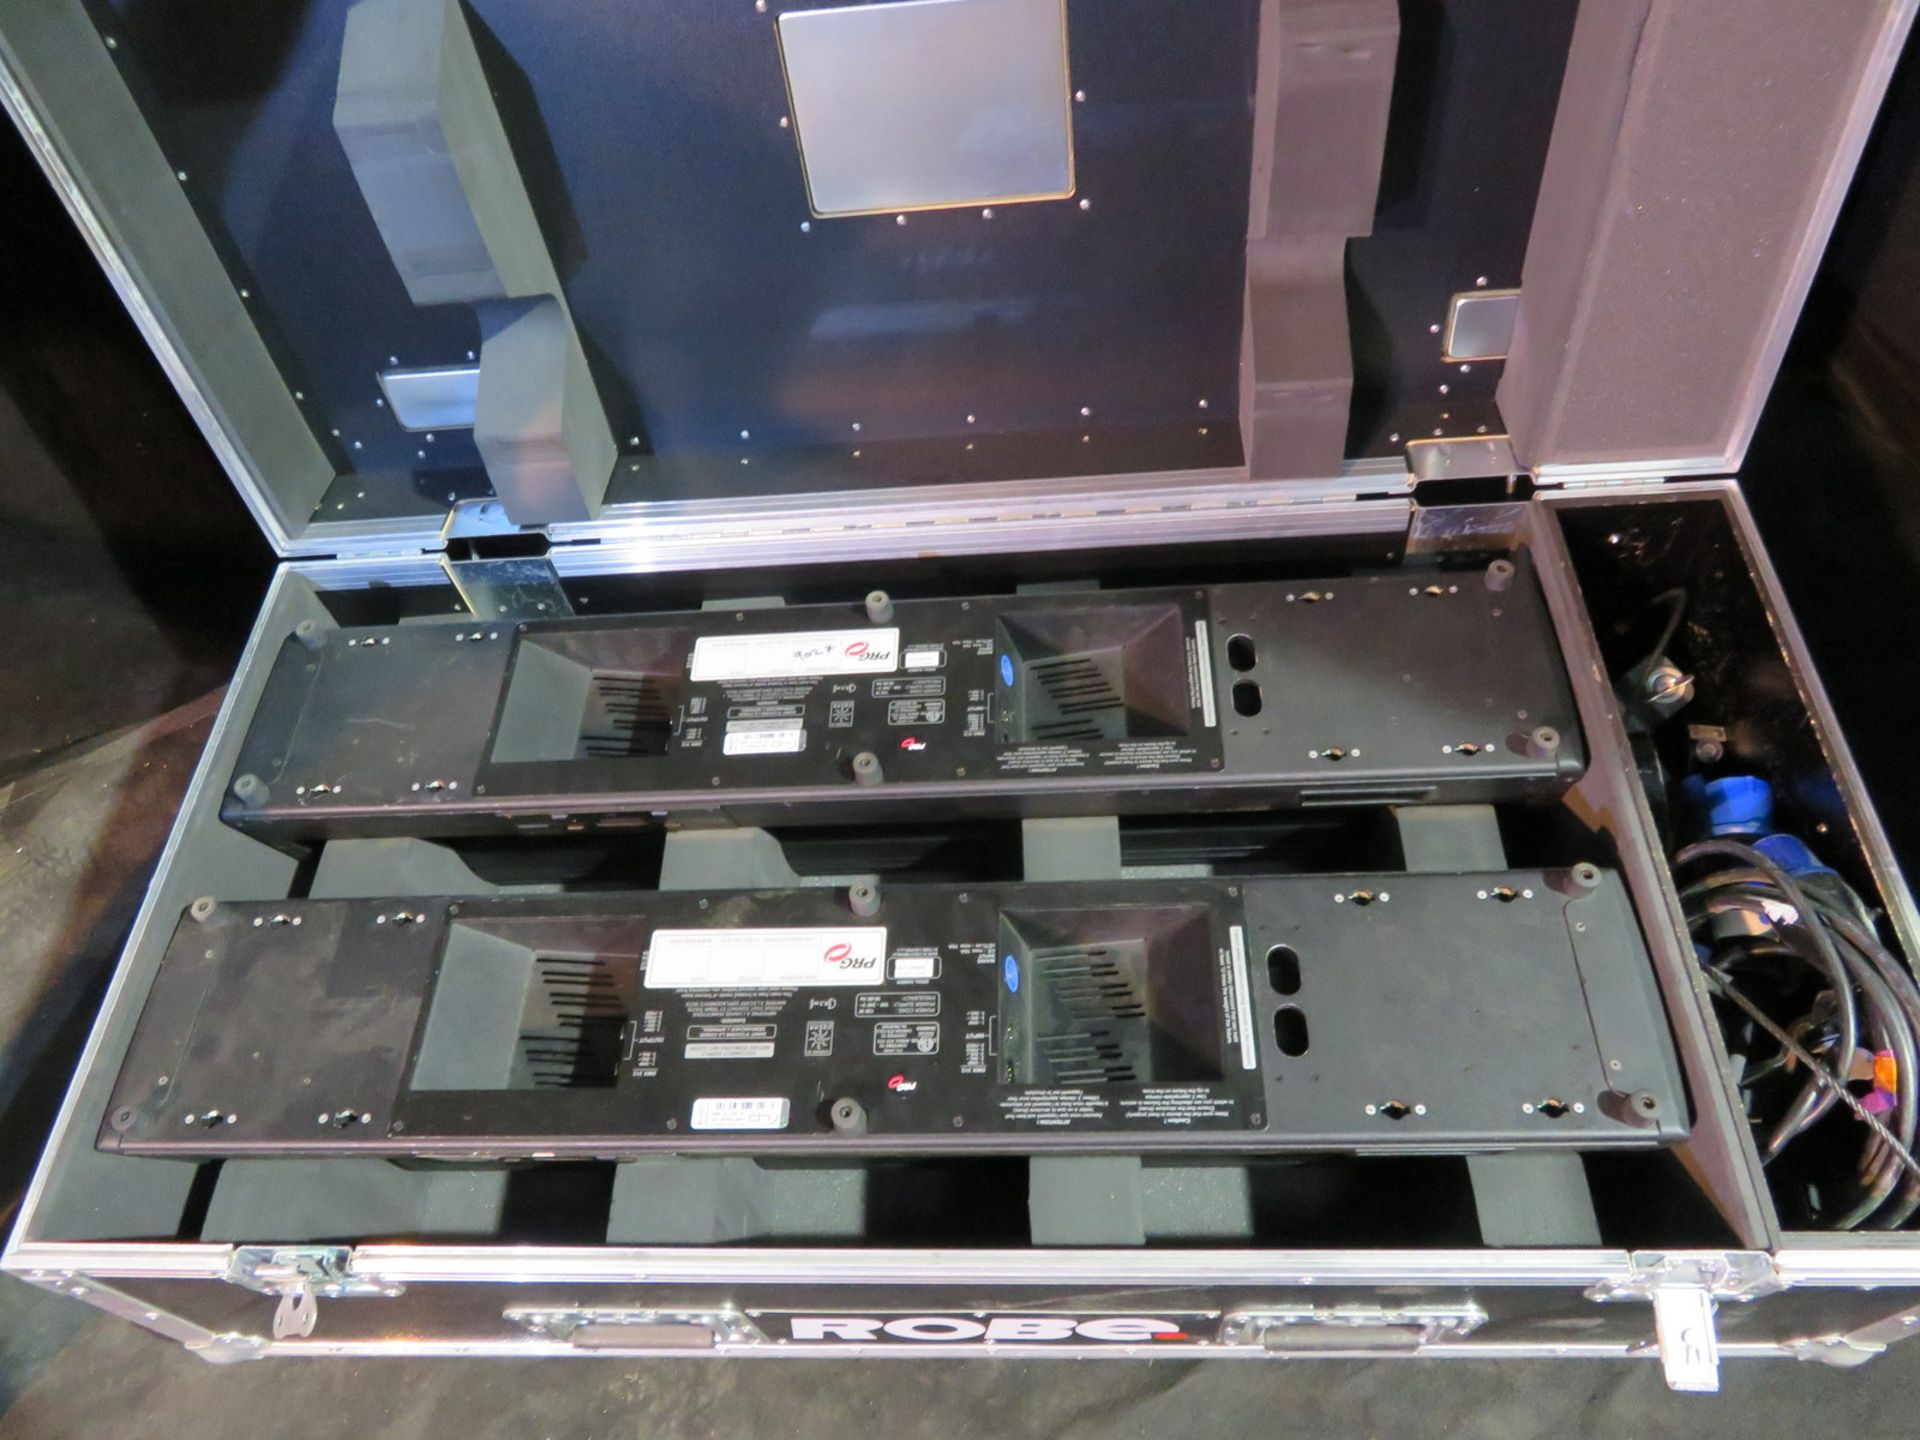 Pair of Robe CycFX8 in twin flightcase - Power hours: 9155 & 9037 - working - Image 7 of 11